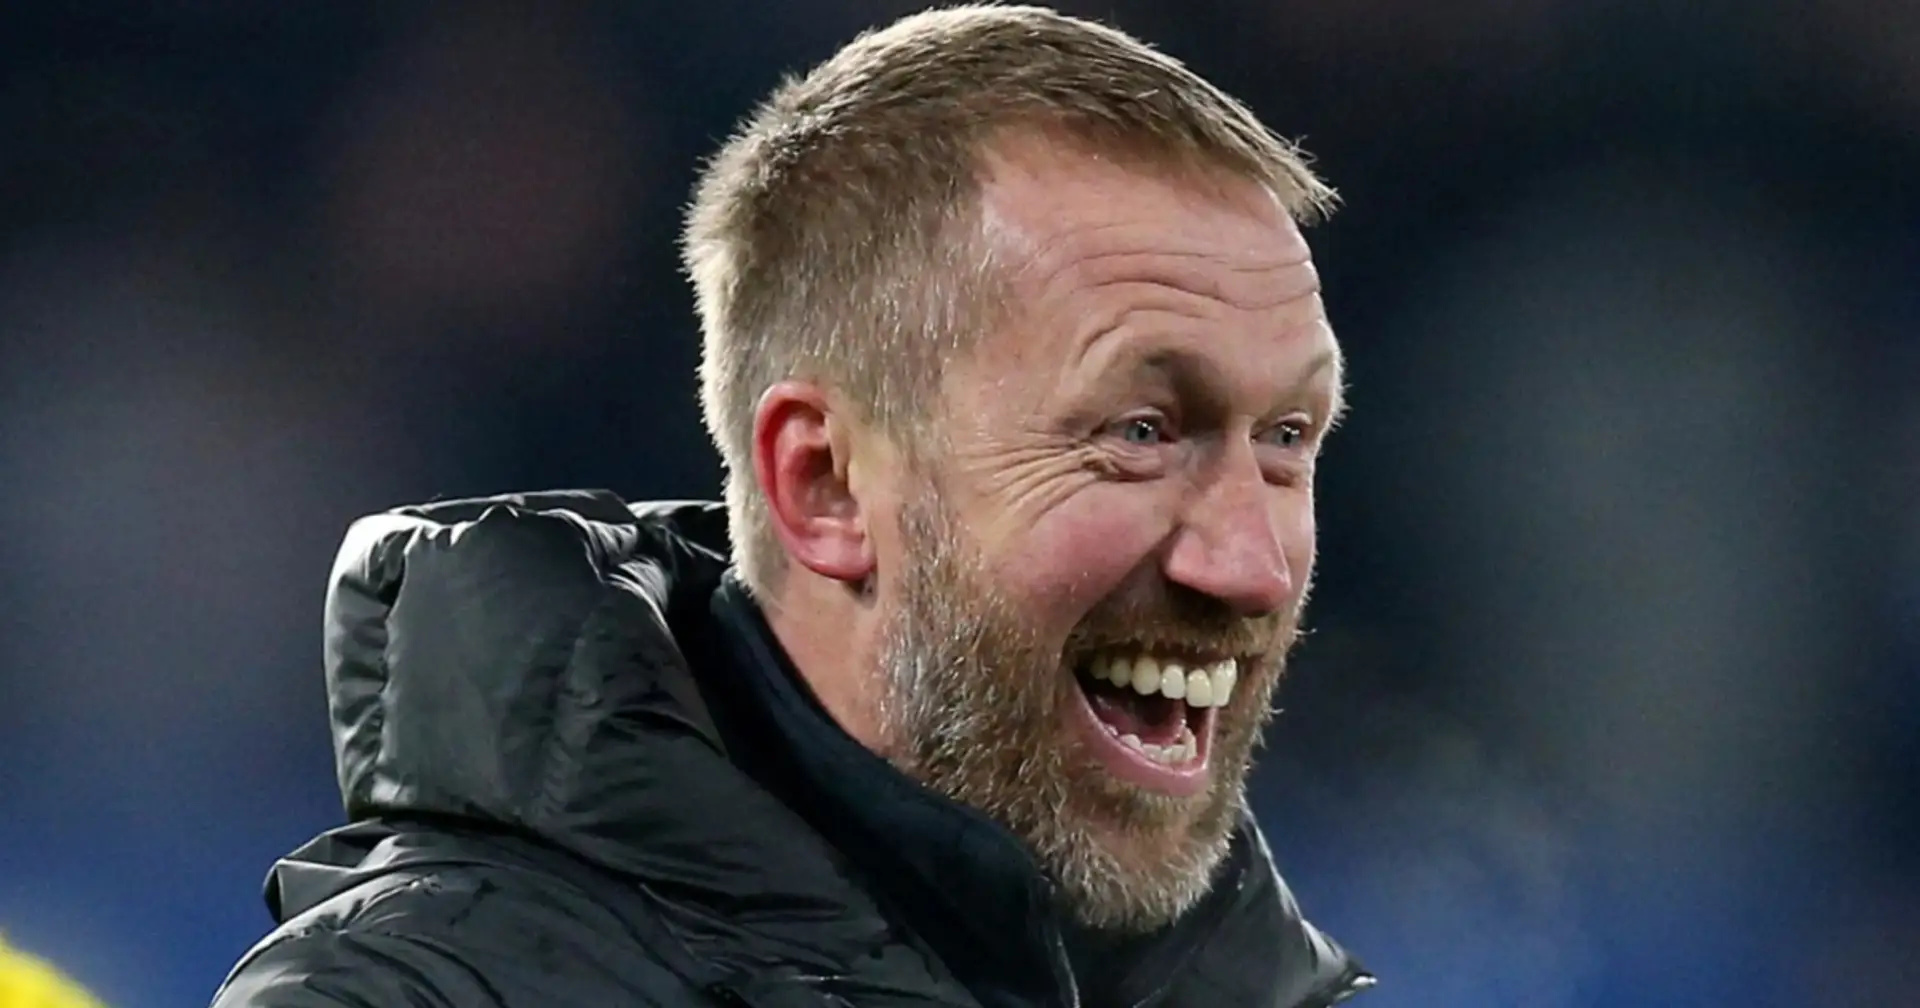 'I don't think he would excite the fans or the players': Man United told to stay away from Graham Potter